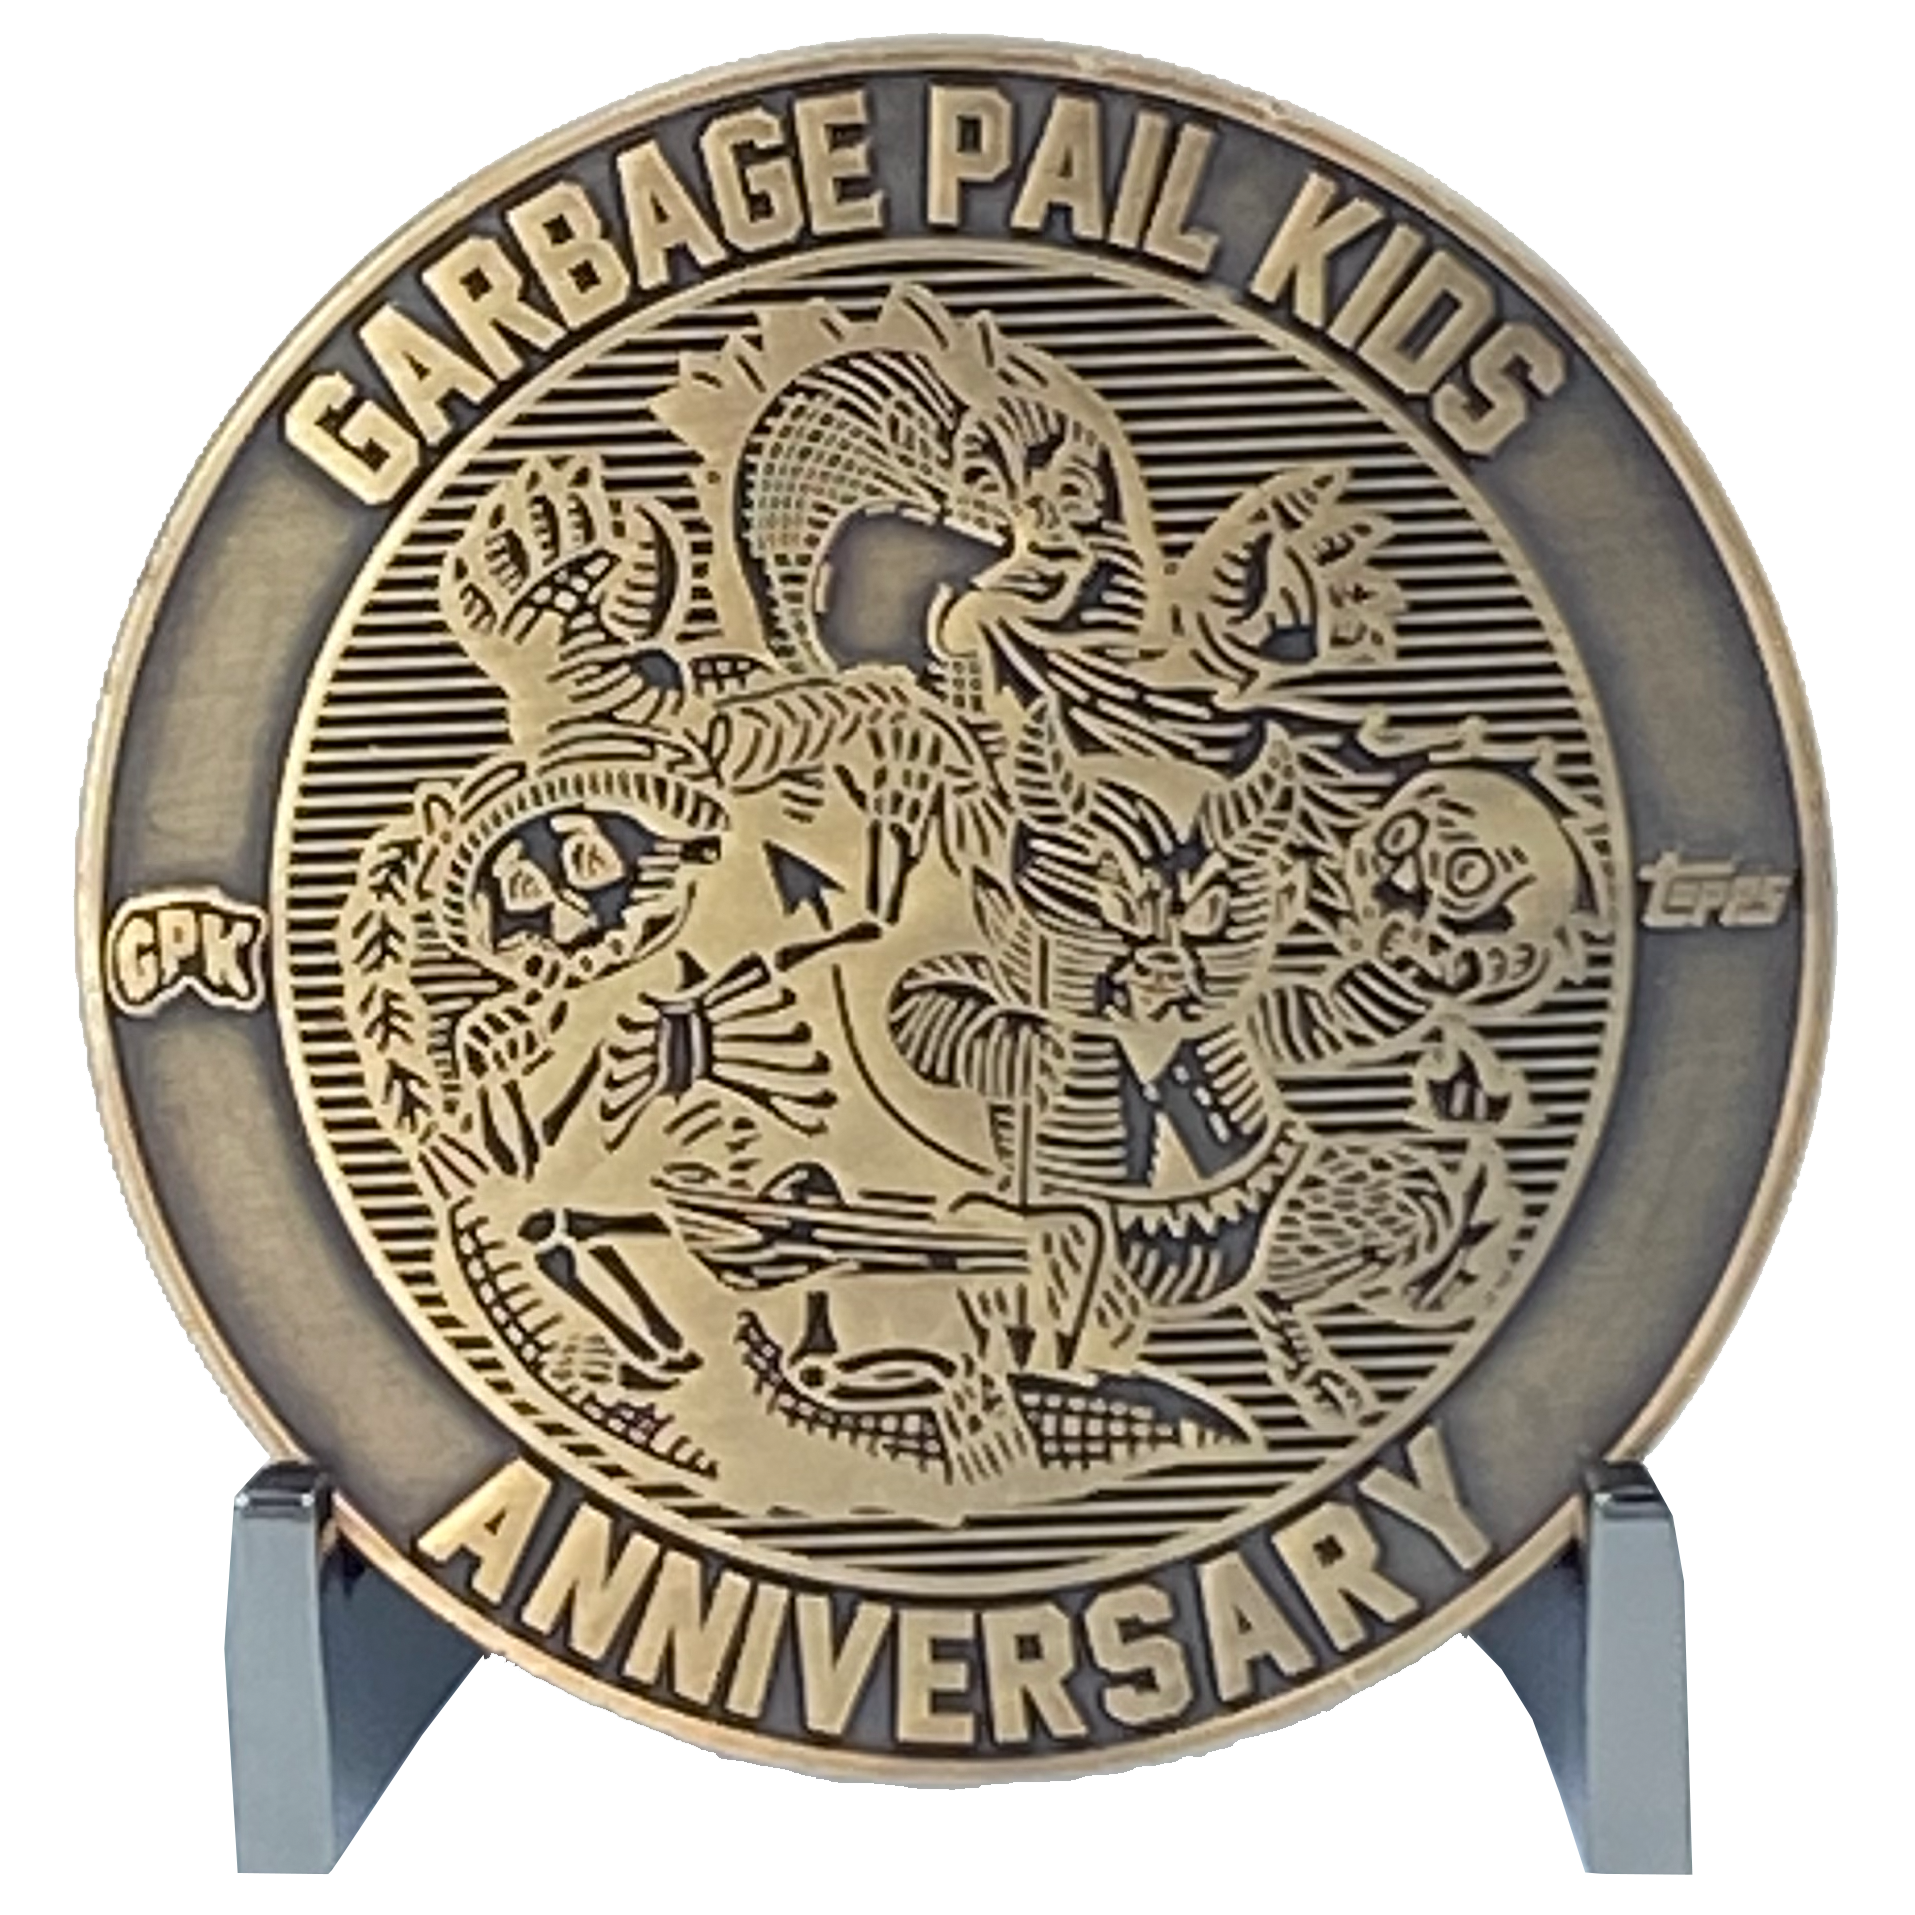 Coin 003 Artist Proof with no enamel Topps Officially Licensed challenge coin Garbage Pail Kids GPK Nation